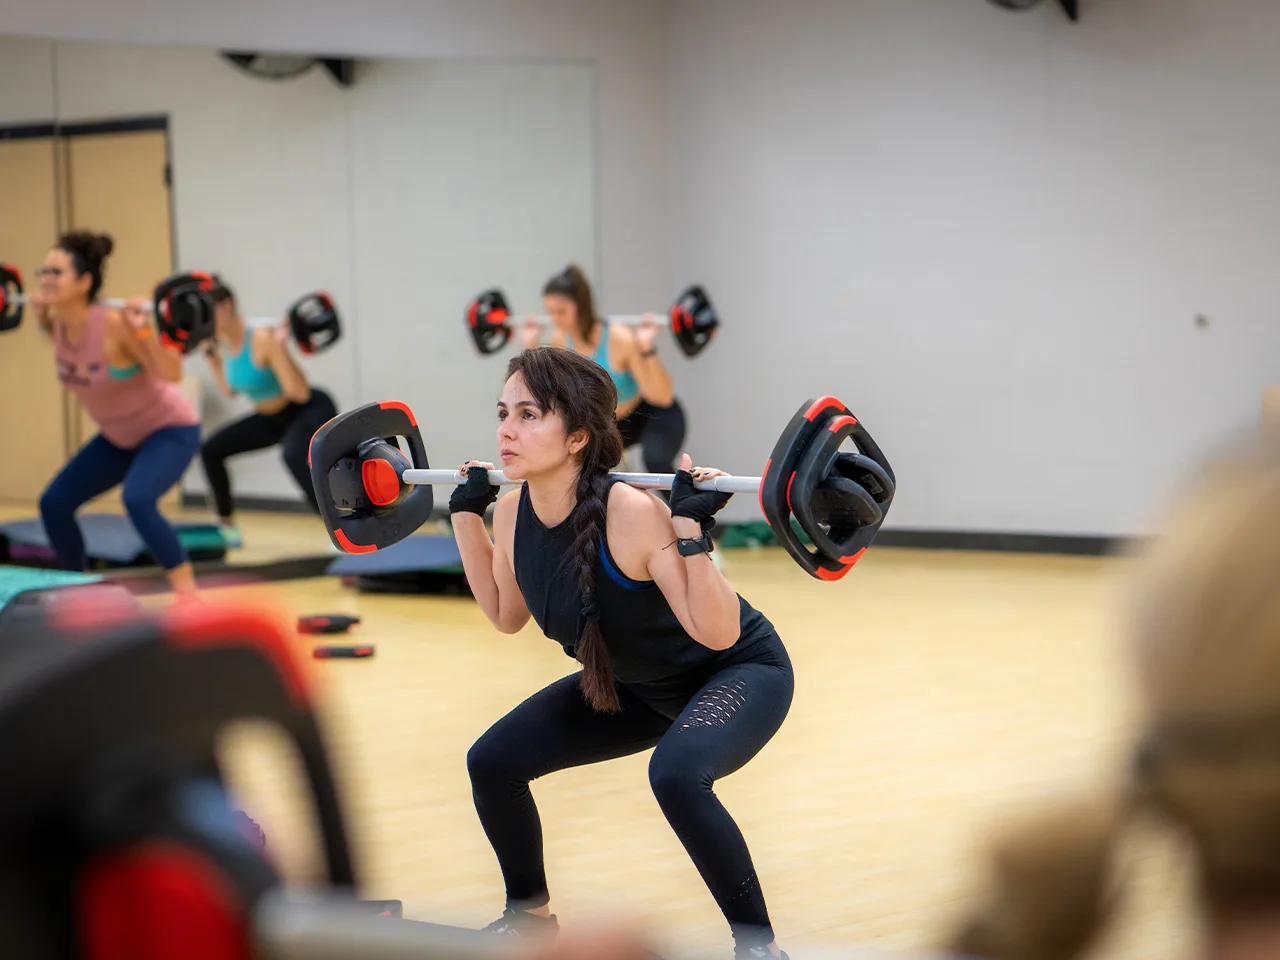 A woman squats in a group exercise class using a barbell.